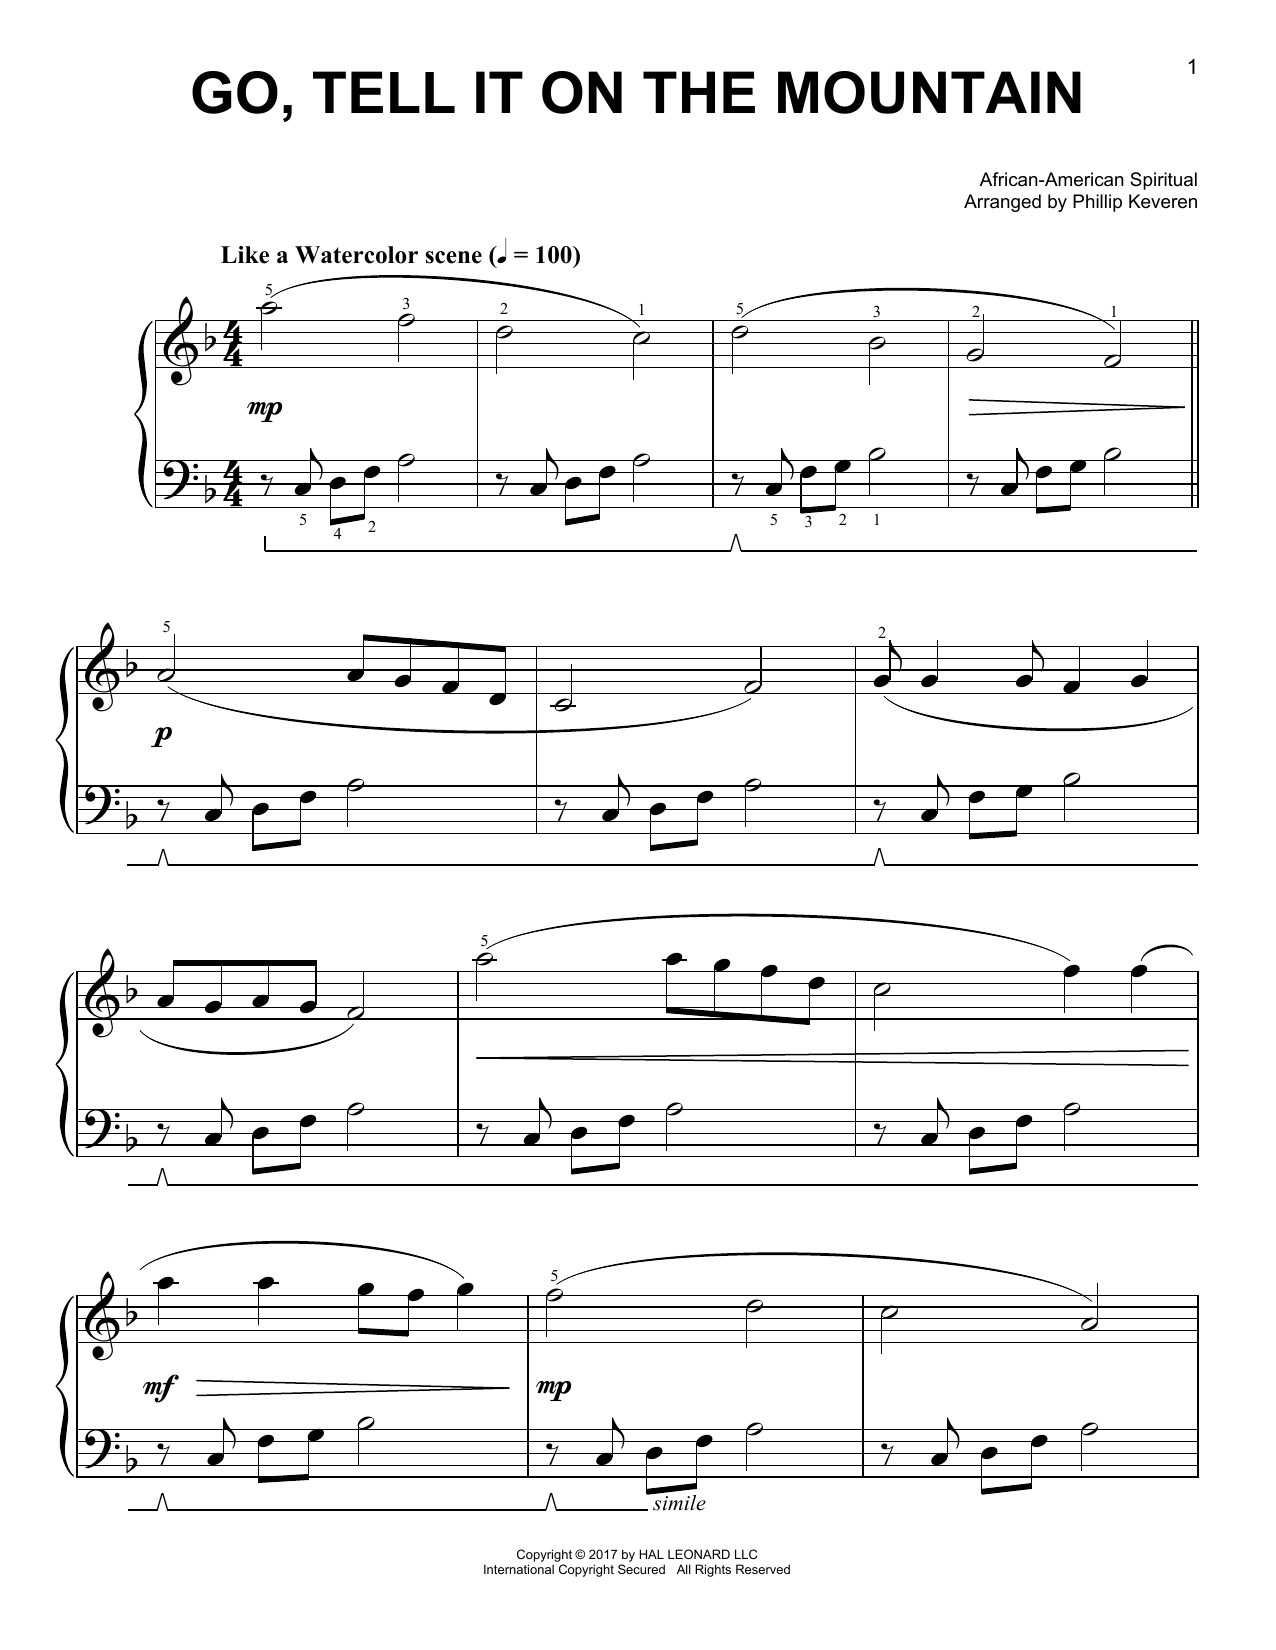 Download African-American Spiritual Go, Tell It On The Mountain [Classical Sheet Music